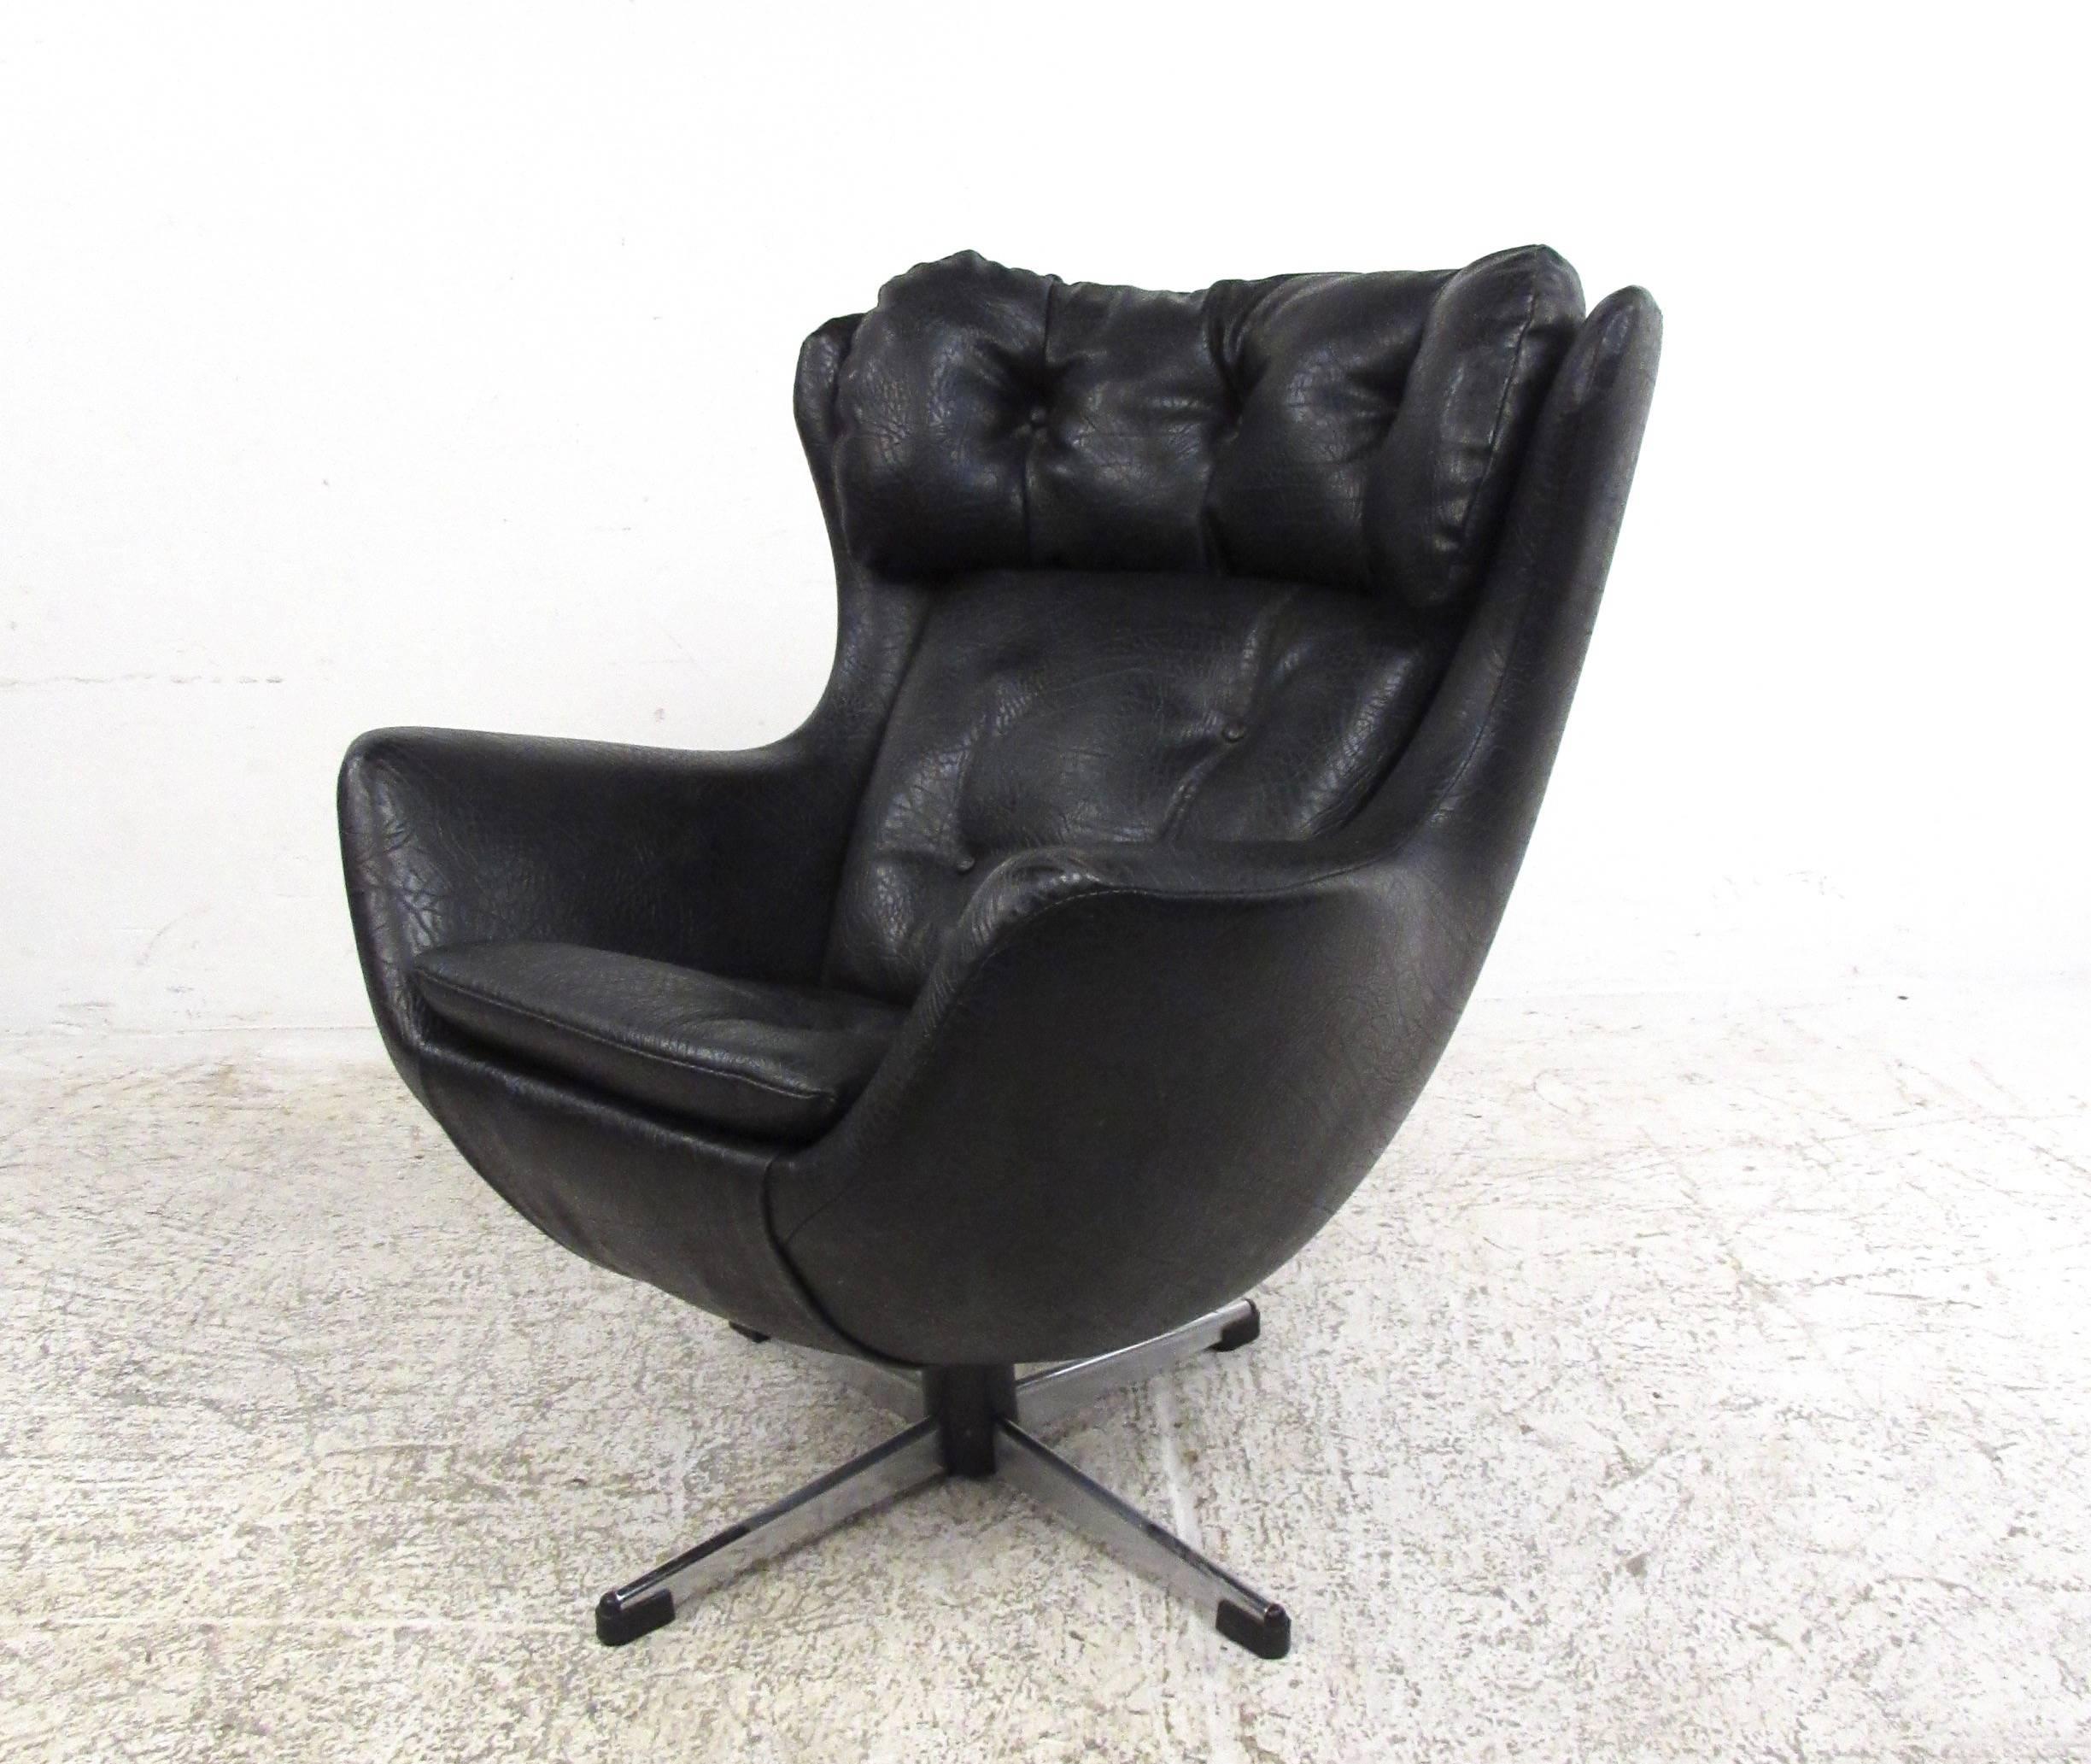 This hard to find scale model swivel lounge chair features tufted vinyl upholstery and the impressive design style of Mid-Century master Arne Jacobsen. This piece may have been originally used as a sales model, it's unique size makes a memorable